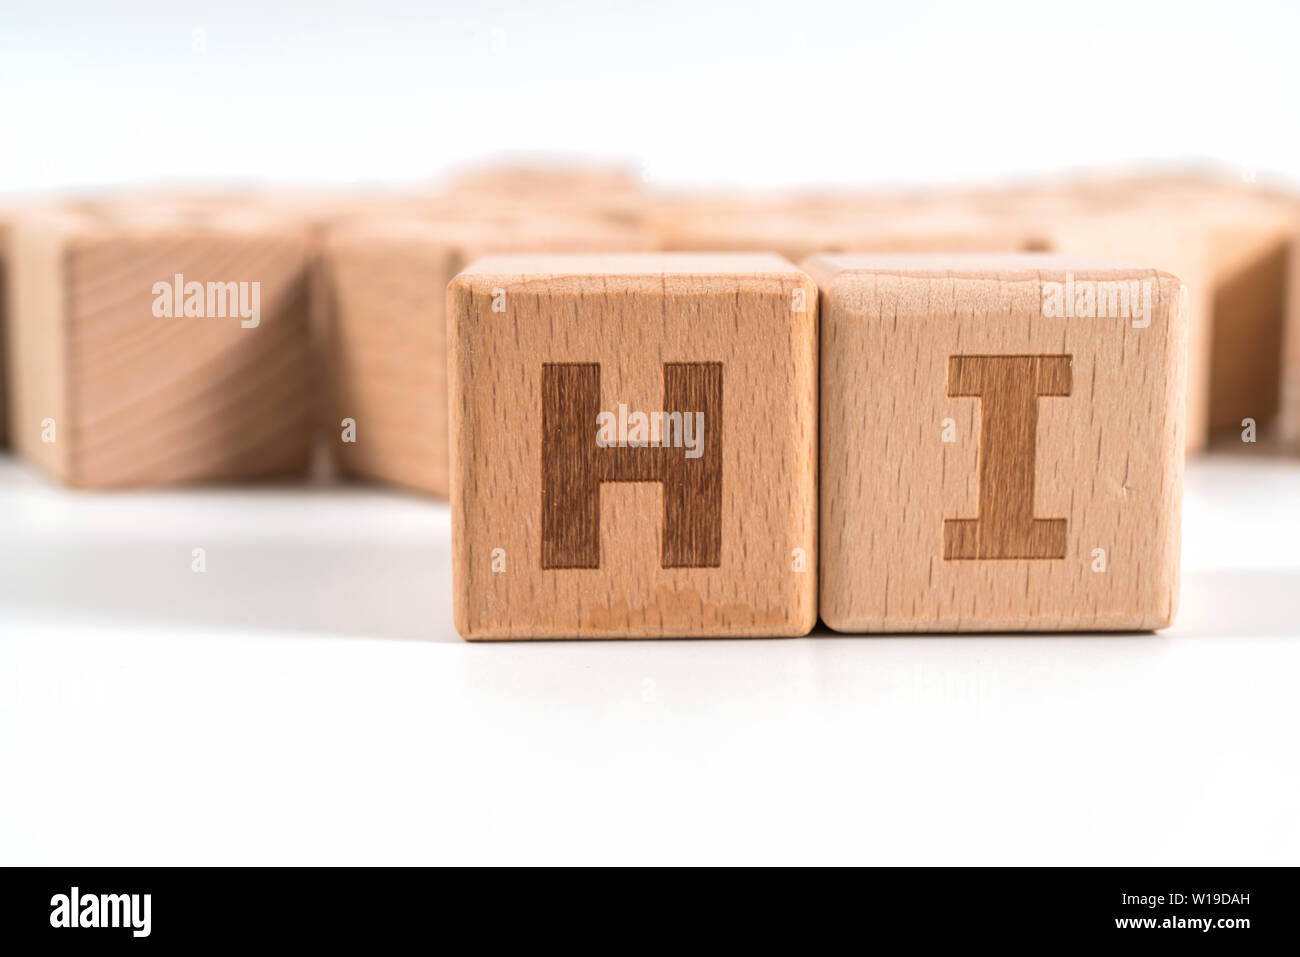 word HI on wood cube dices on white background. Stock Photo